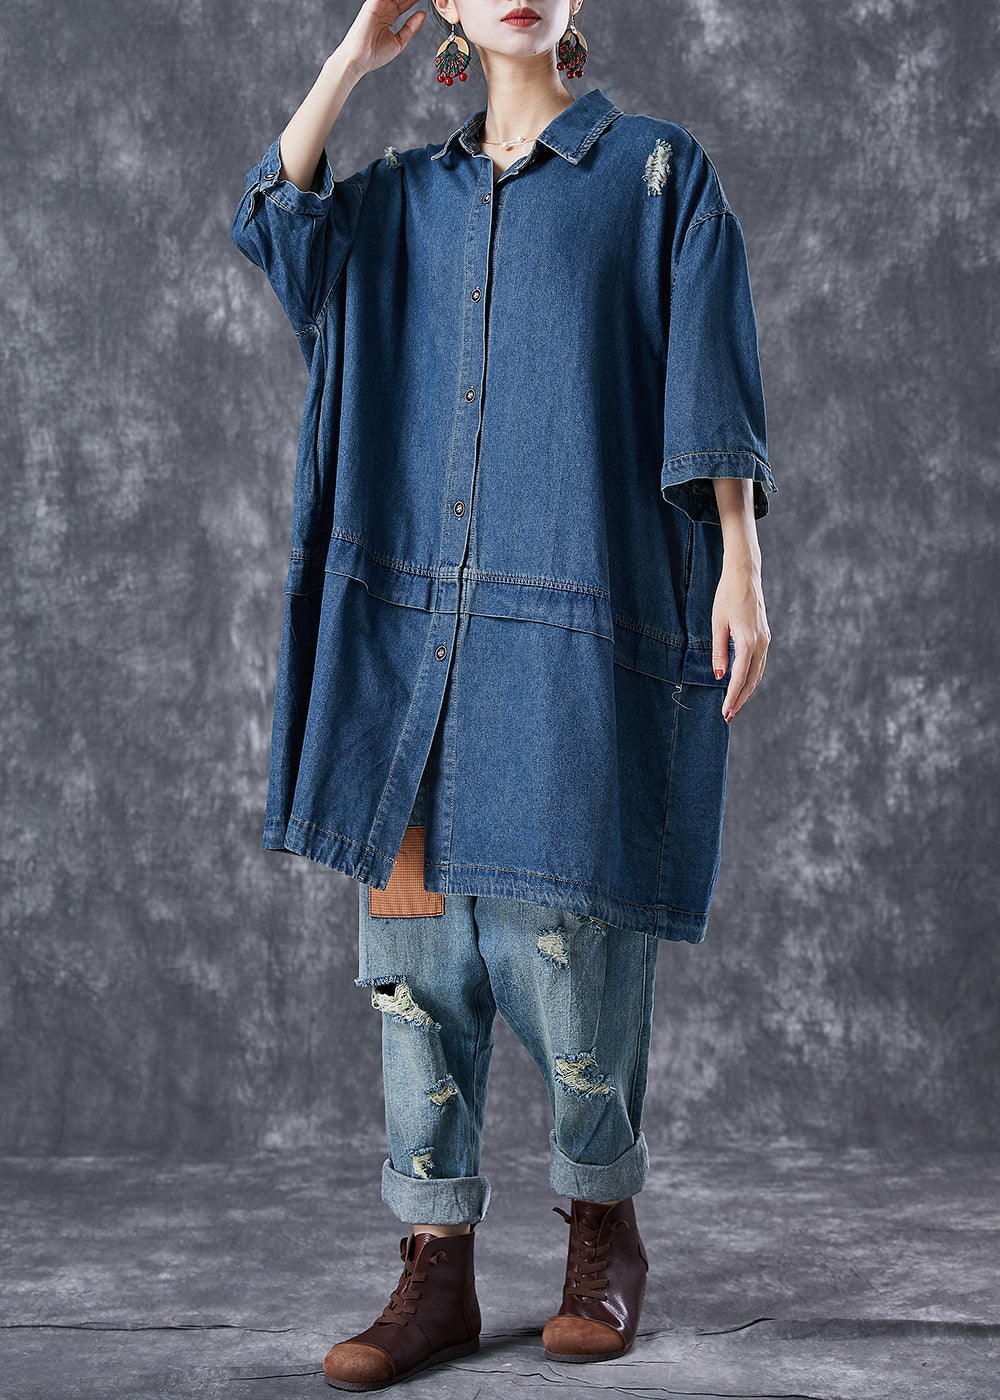 Casual Navy Oversized Patchwork Denim Ripped Trench Coats Bracelet Sleeve Ada Fashion